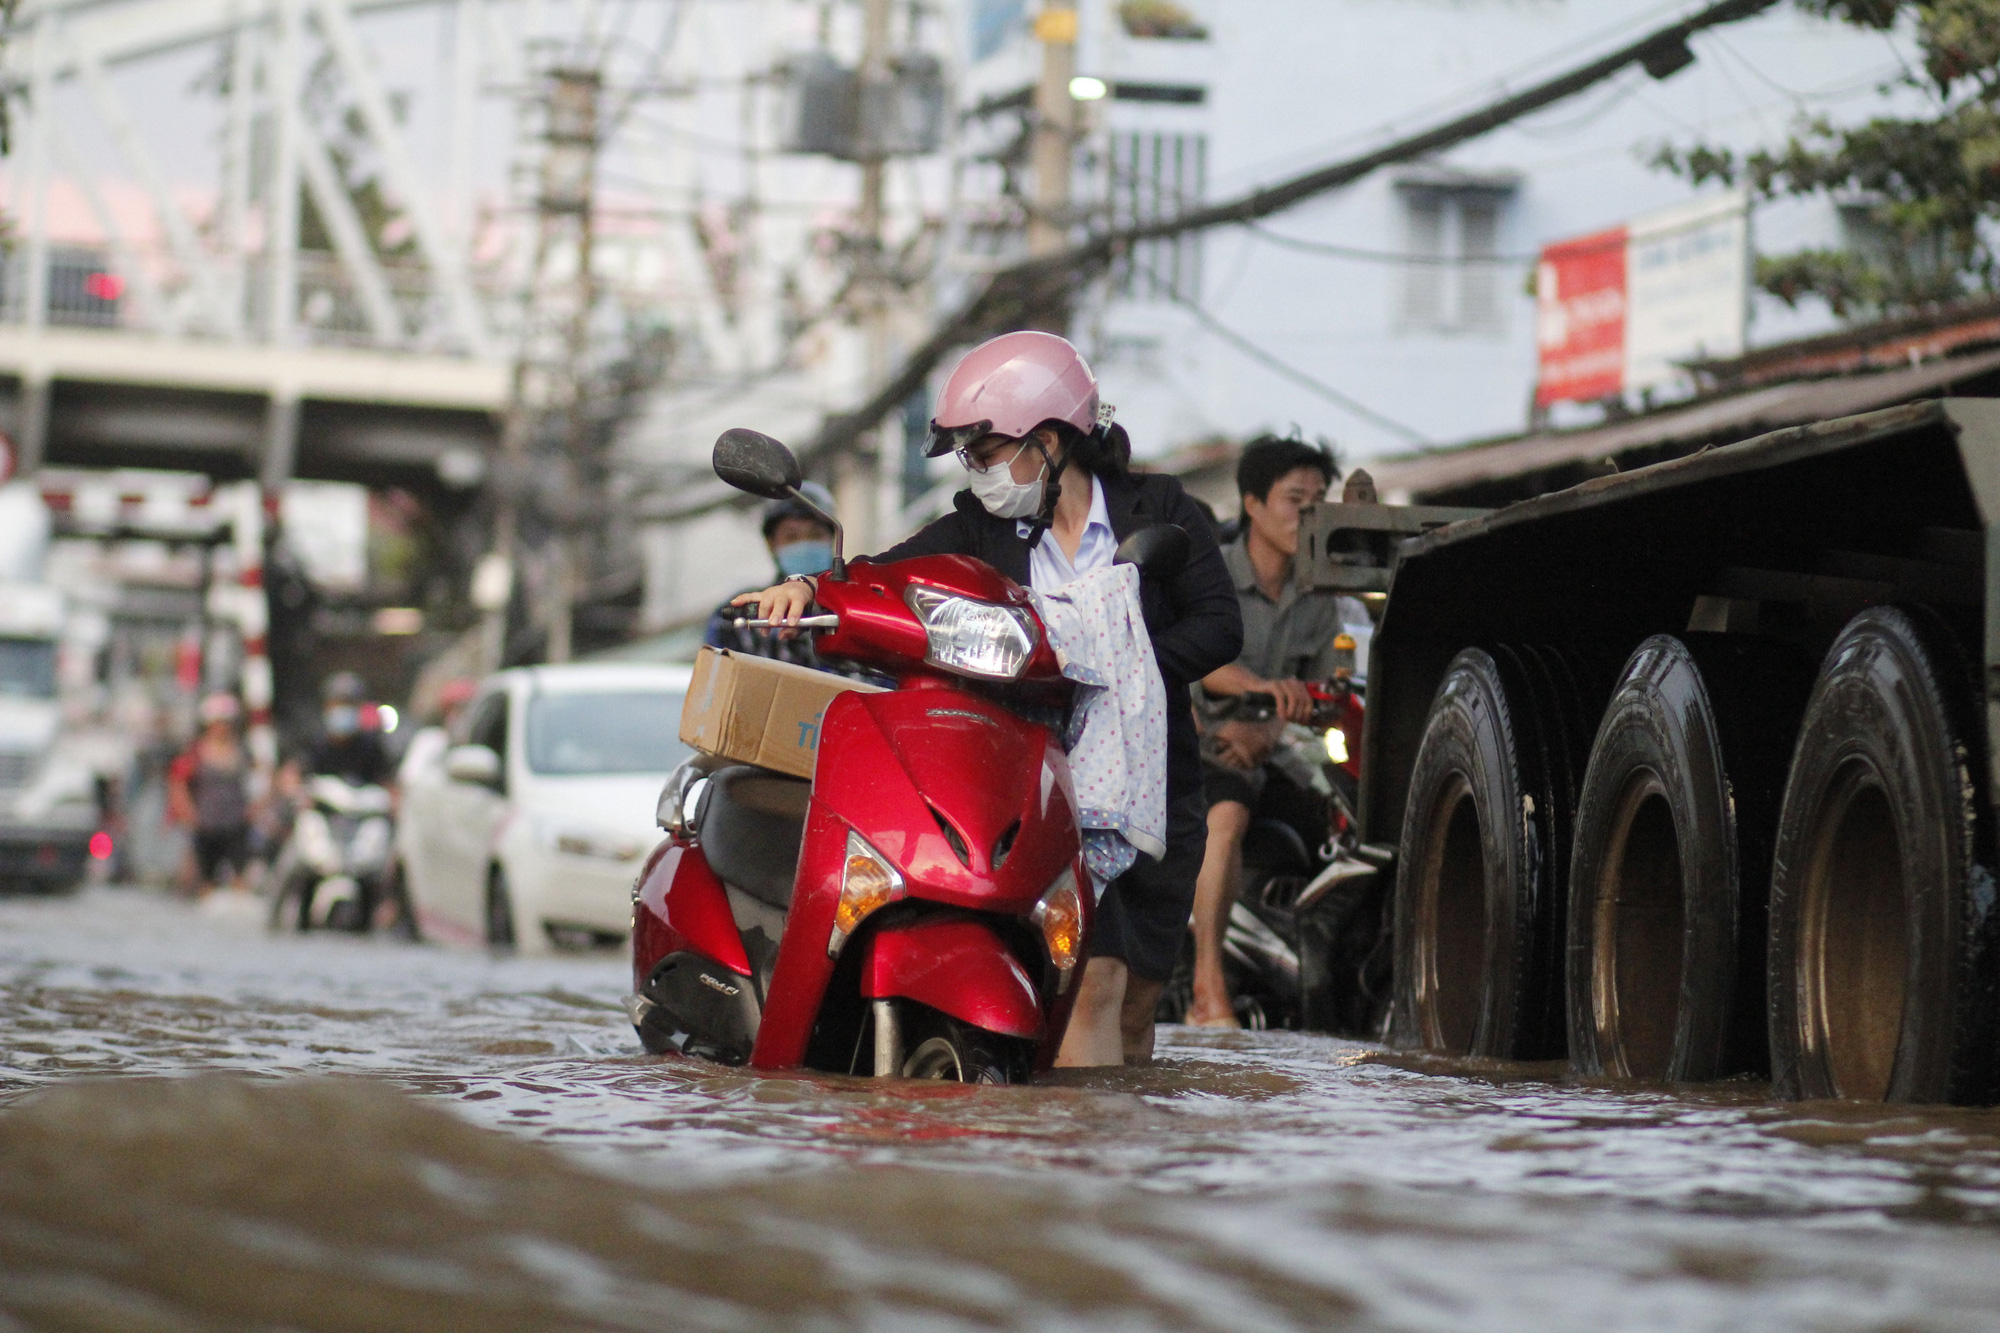 A woman pushes her broken-down motorbike on a flooded street in Ho Chi Minh City, November 16, 2020. Photo: Chau Tuan / Tuoi Tre